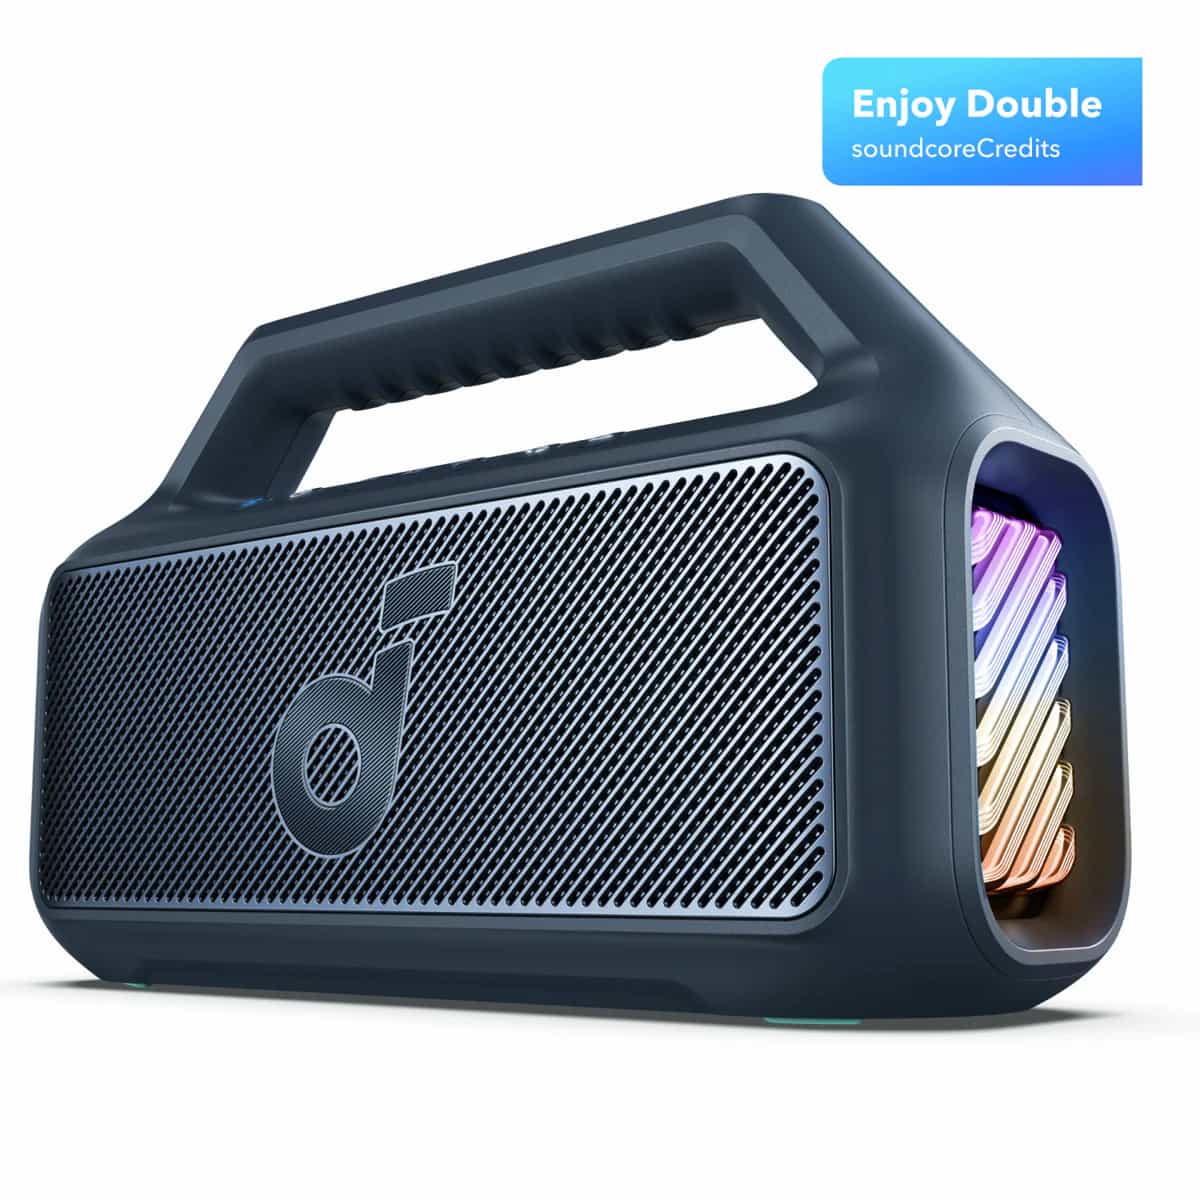 type=product&handle=boom2-bluetooth-speaker-for-bass&sku=A3138011